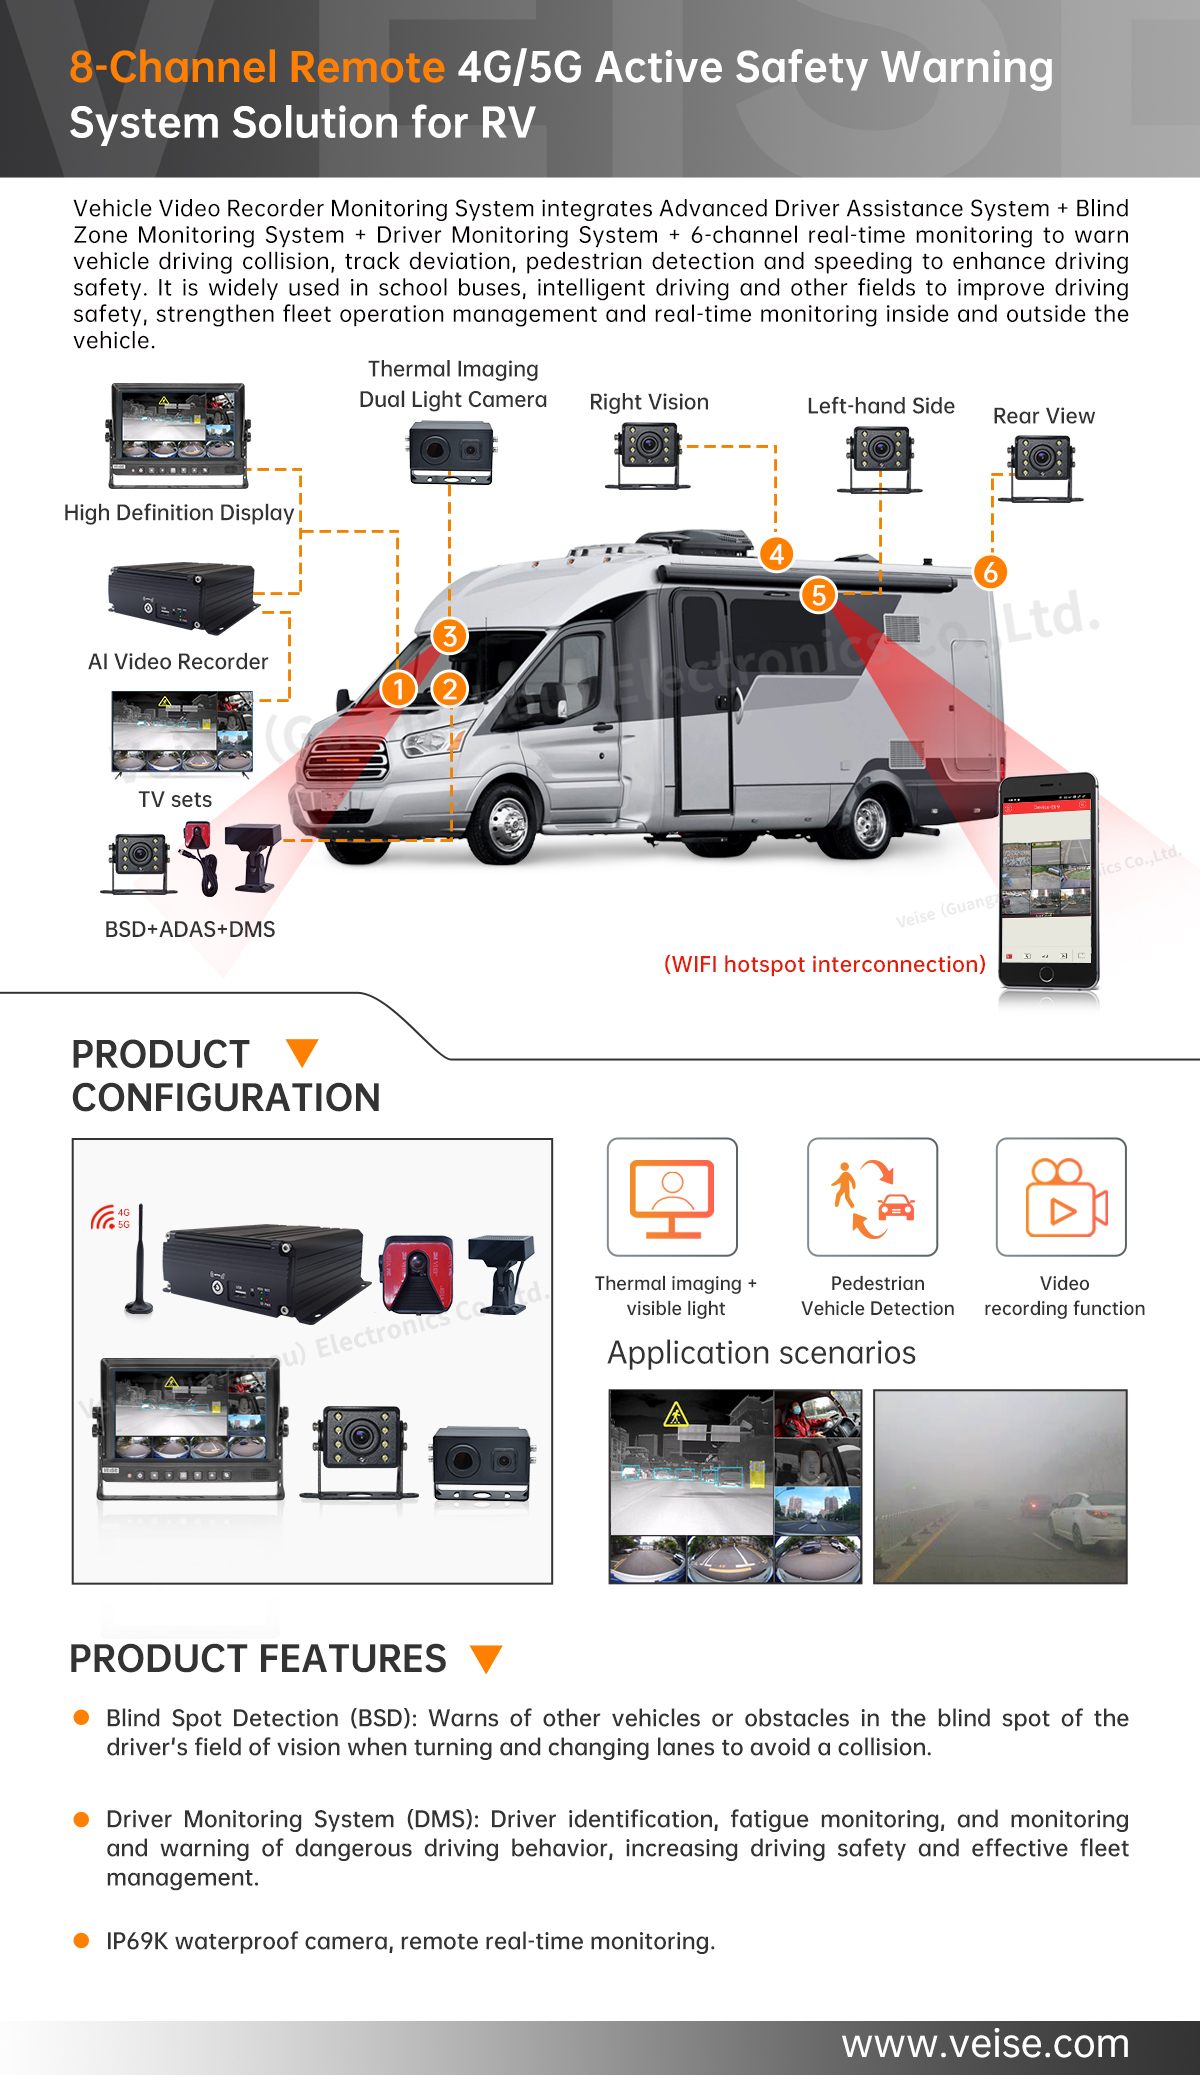 8-Channel Remote 4G/5G Active Safety Warning System Solution for RV